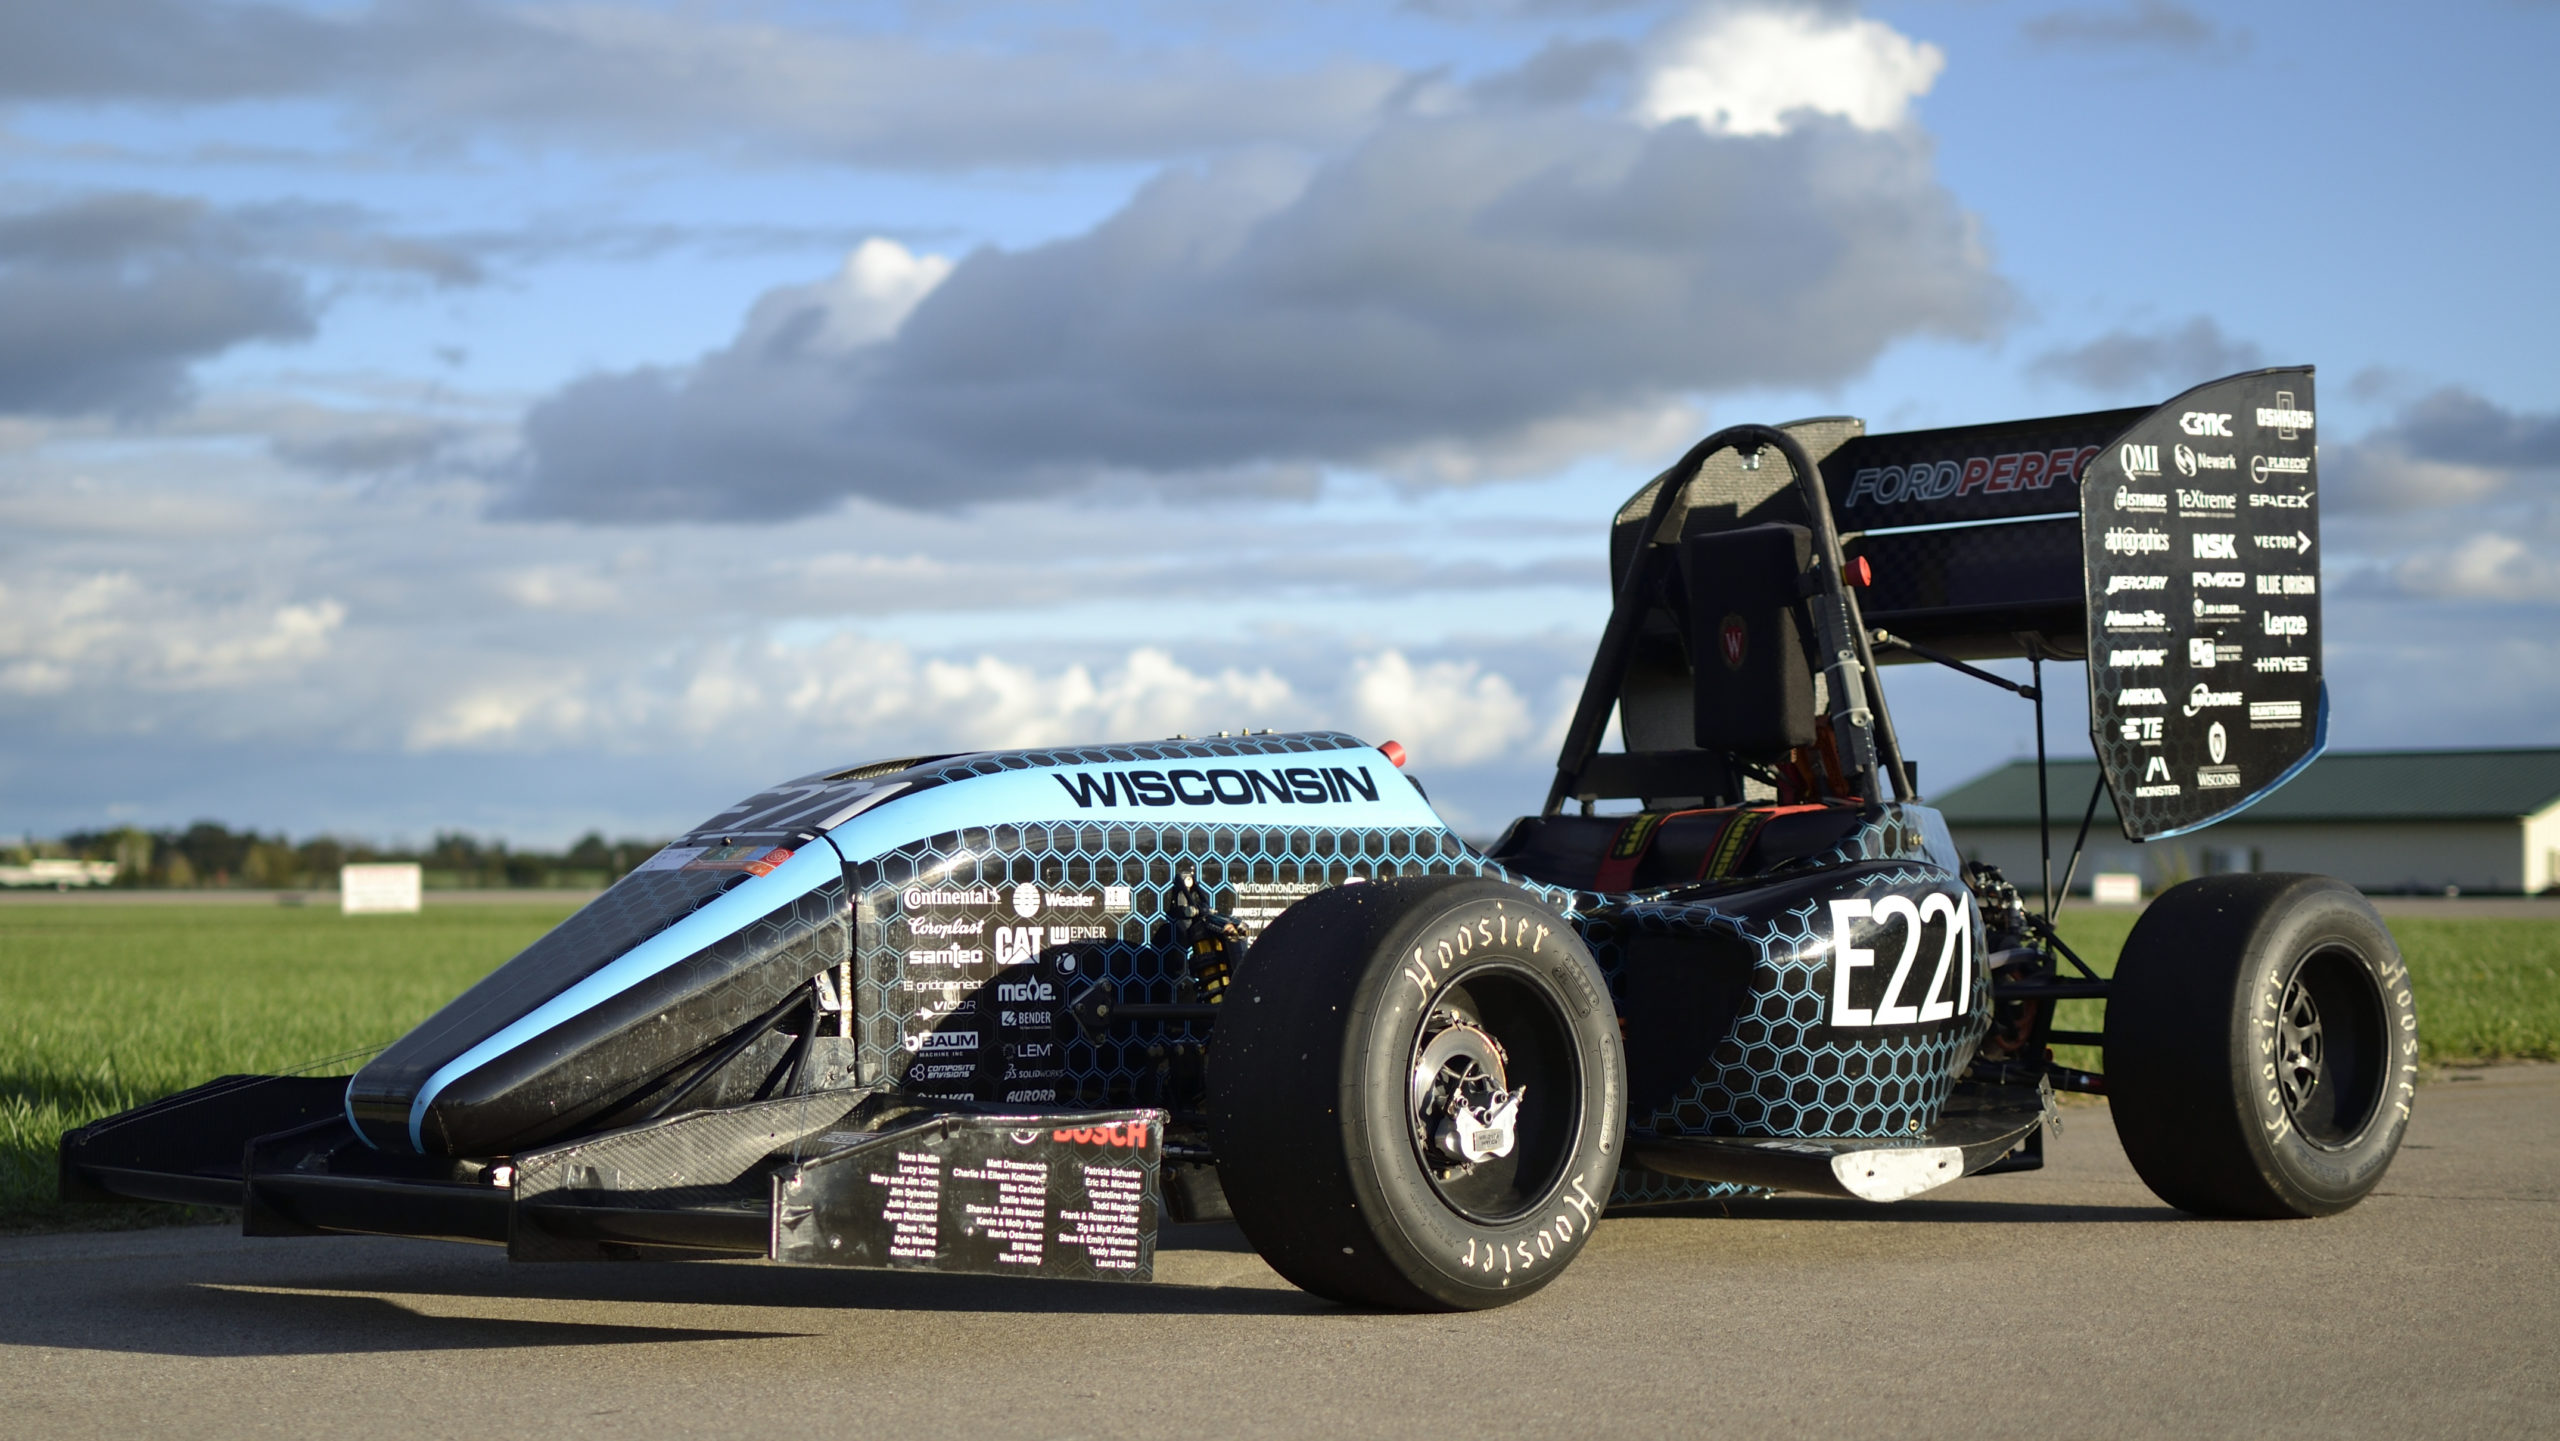 The first electric vehicle produced by Wisconsin Racing, the WR-217e was designed to share a monocoque with the WR-217c and utilize a bespoke rear frame design to contain the team's first-ever custom high voltage battery. The team earned 1st in the design event with this all-wheel-drive vehicle.